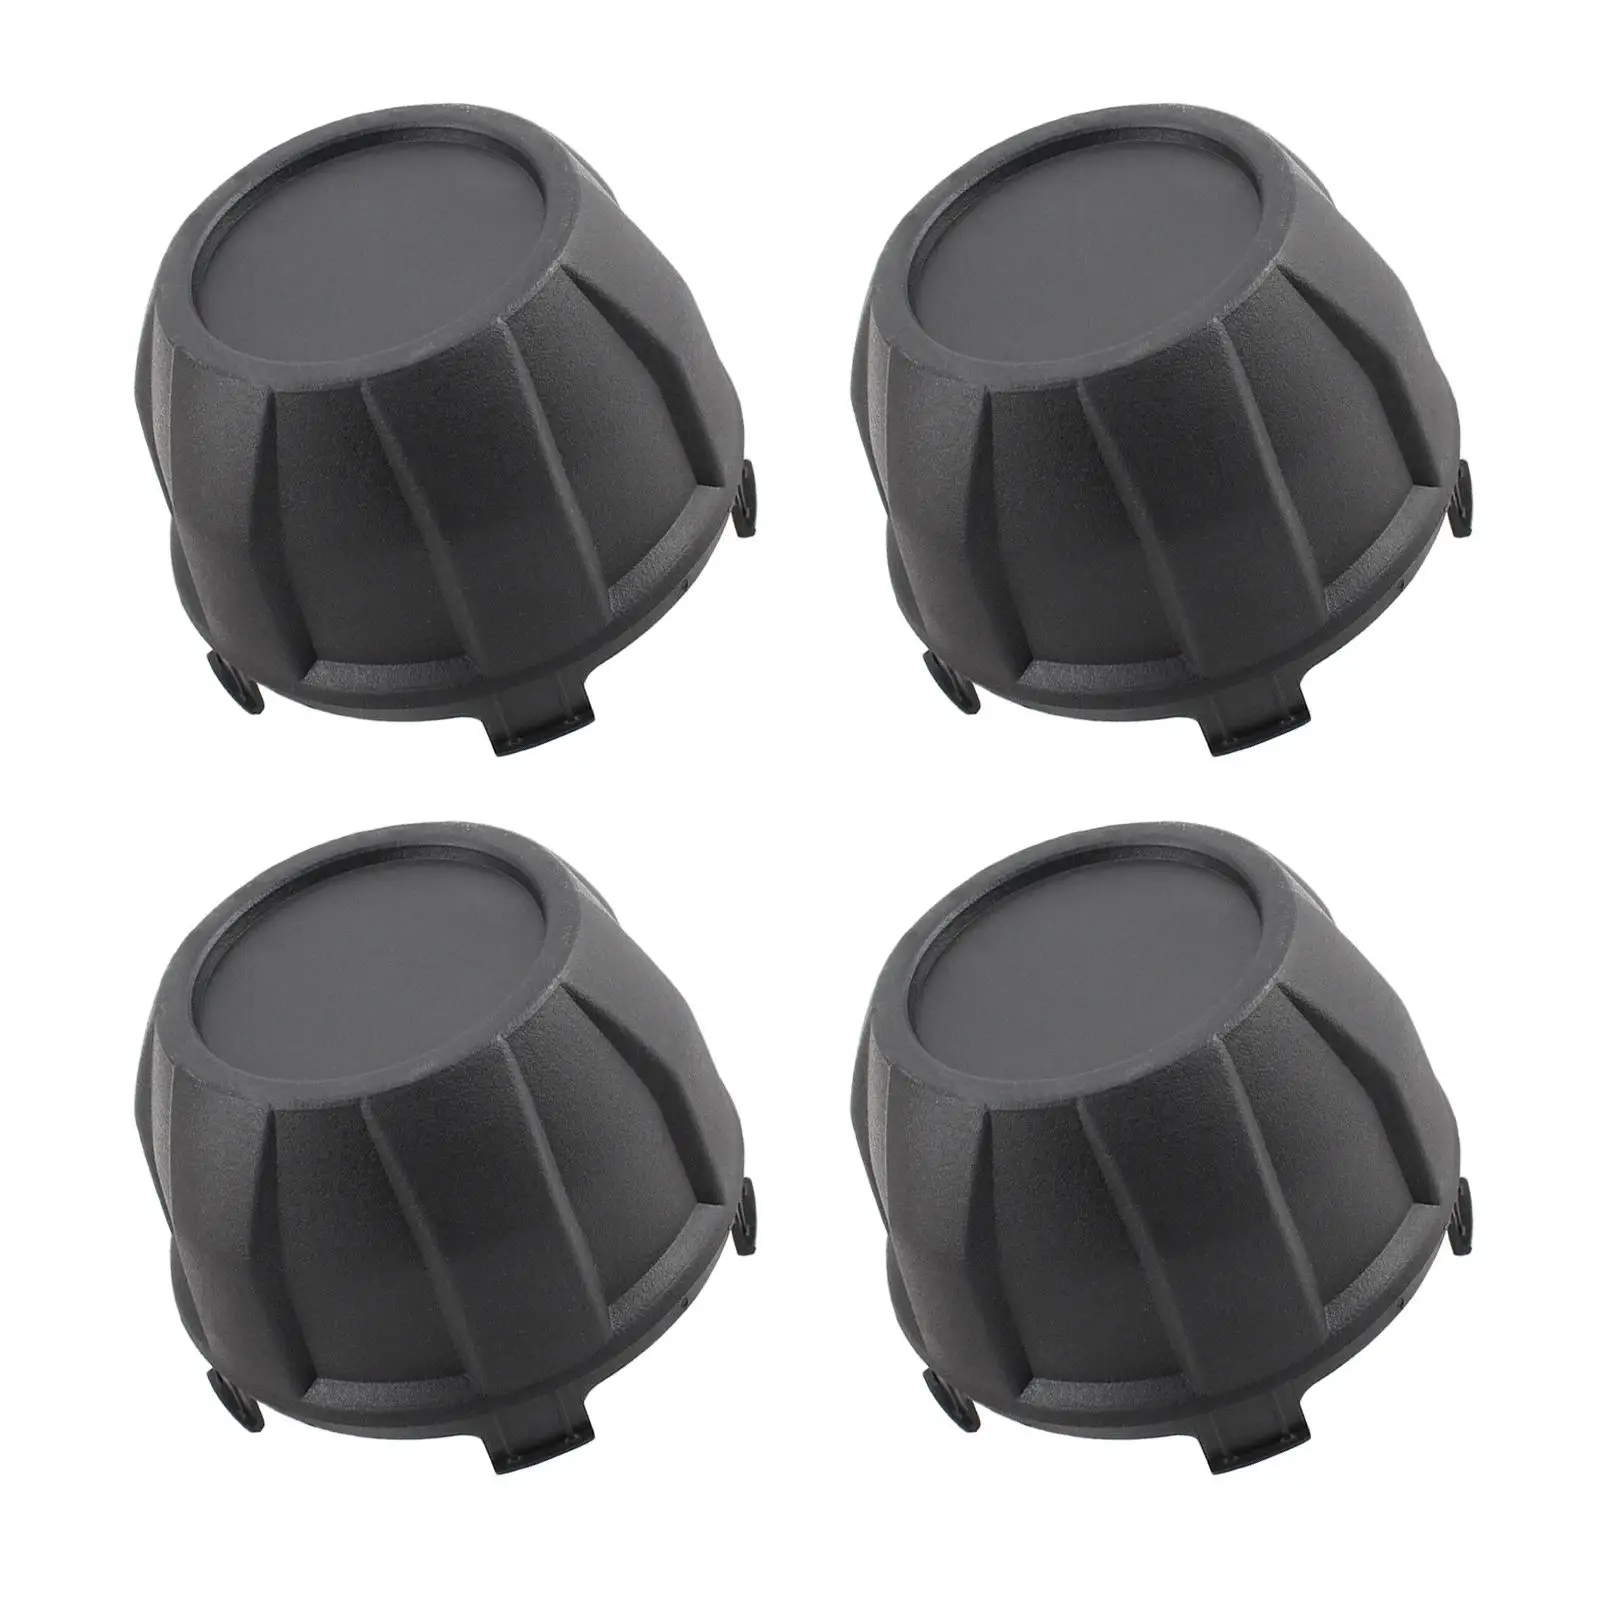 4x Tire Wheel Hub Caps Assembly Motorcycle Black Cap Cover 11065-1341 for Teryx Krx 1000 Accessories Replacement